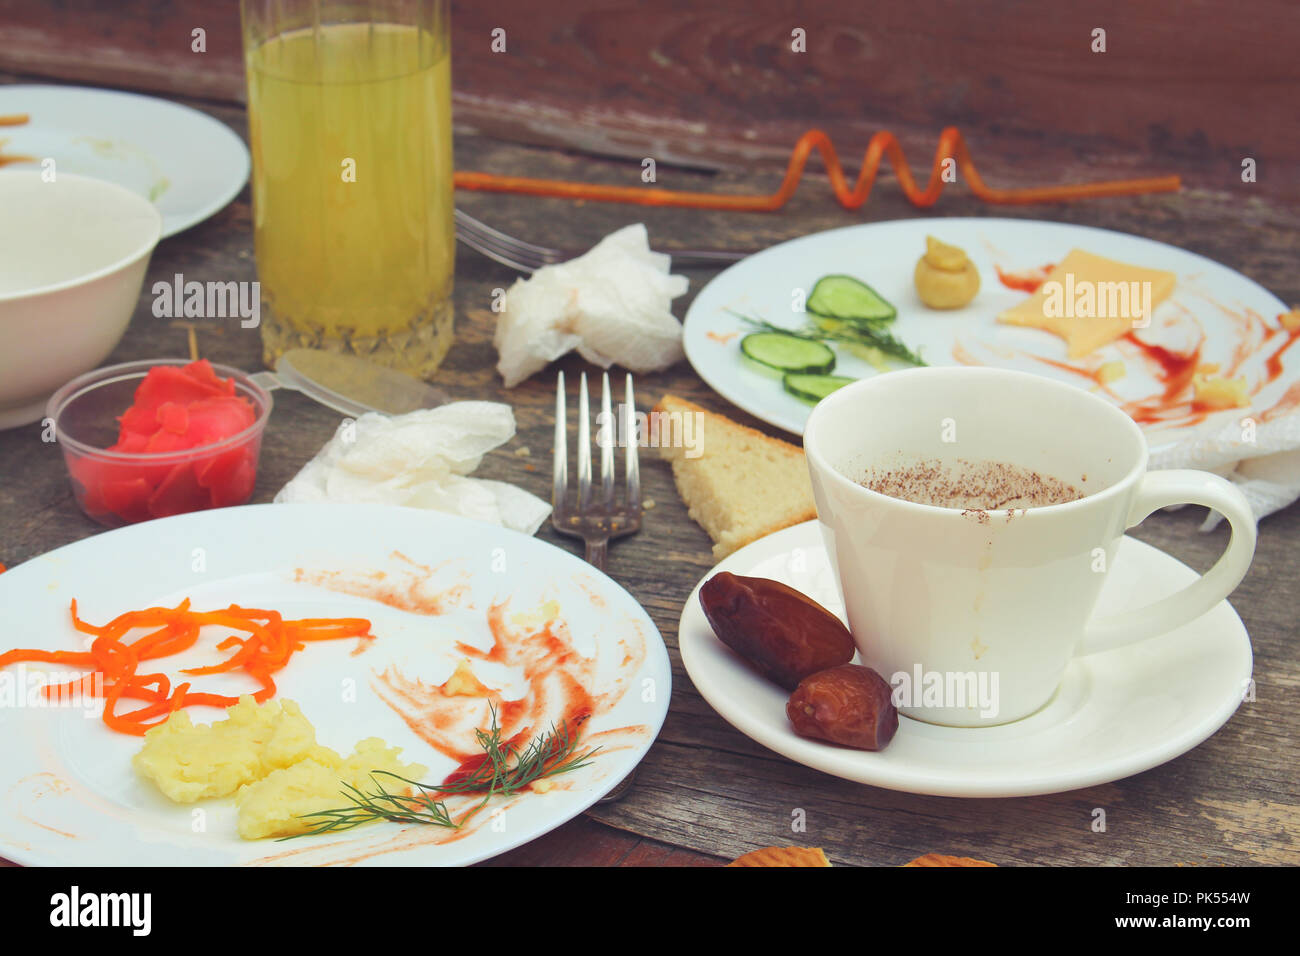 Messy table after party. Leftover food, spilled drinks, dirty dishes. Toned image. Stock Photo